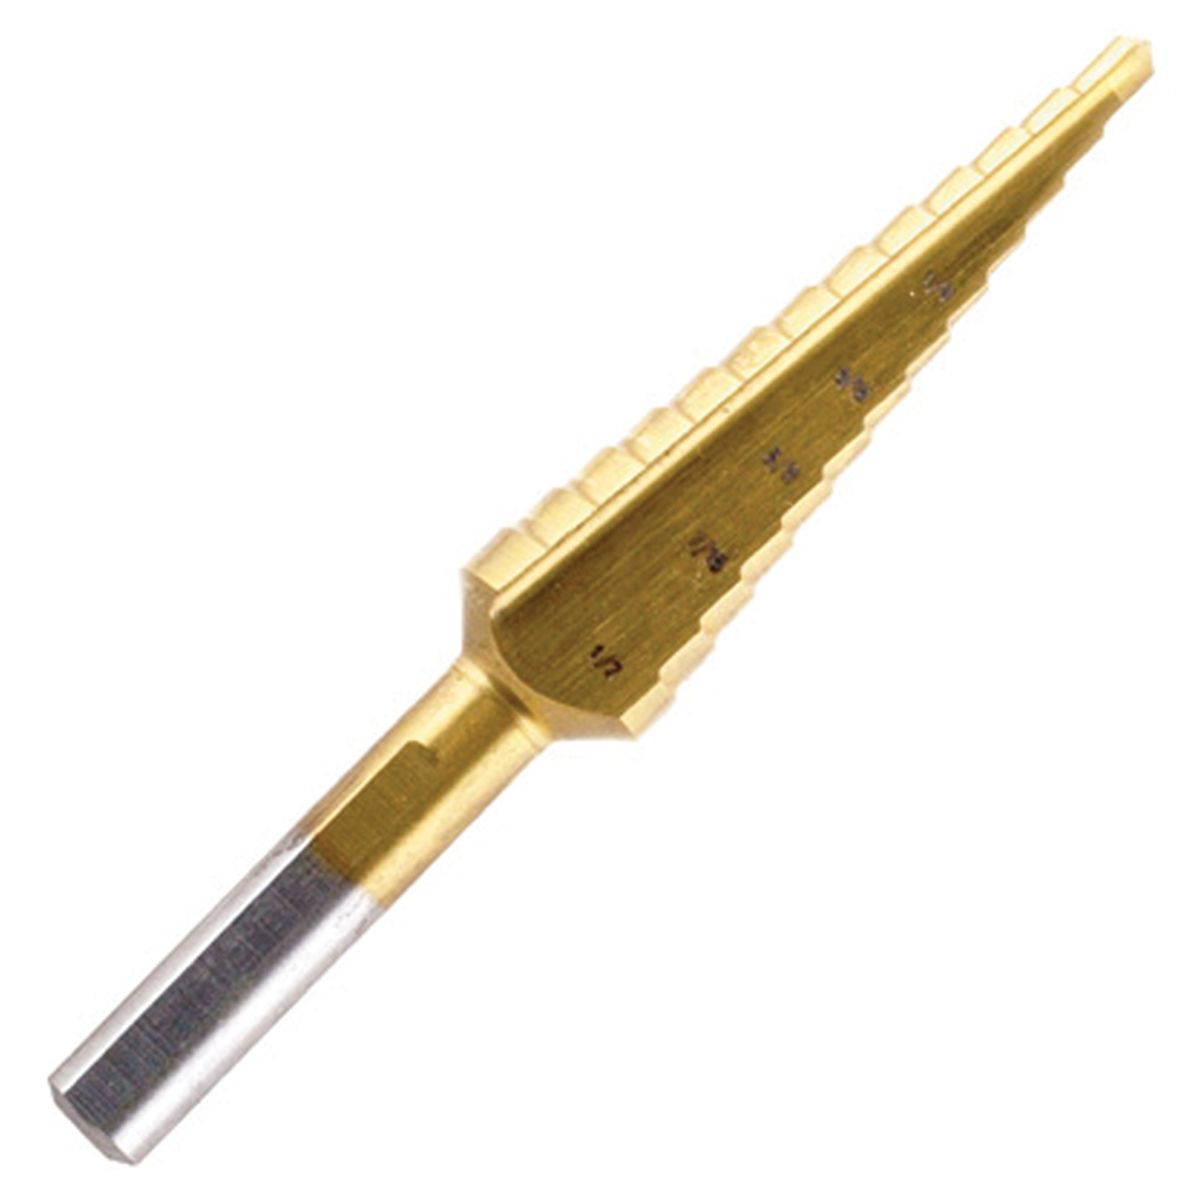 Titanium Coated Step Drill Bit 1/4 In Shank, - 1/8 - 1/2 In by 3